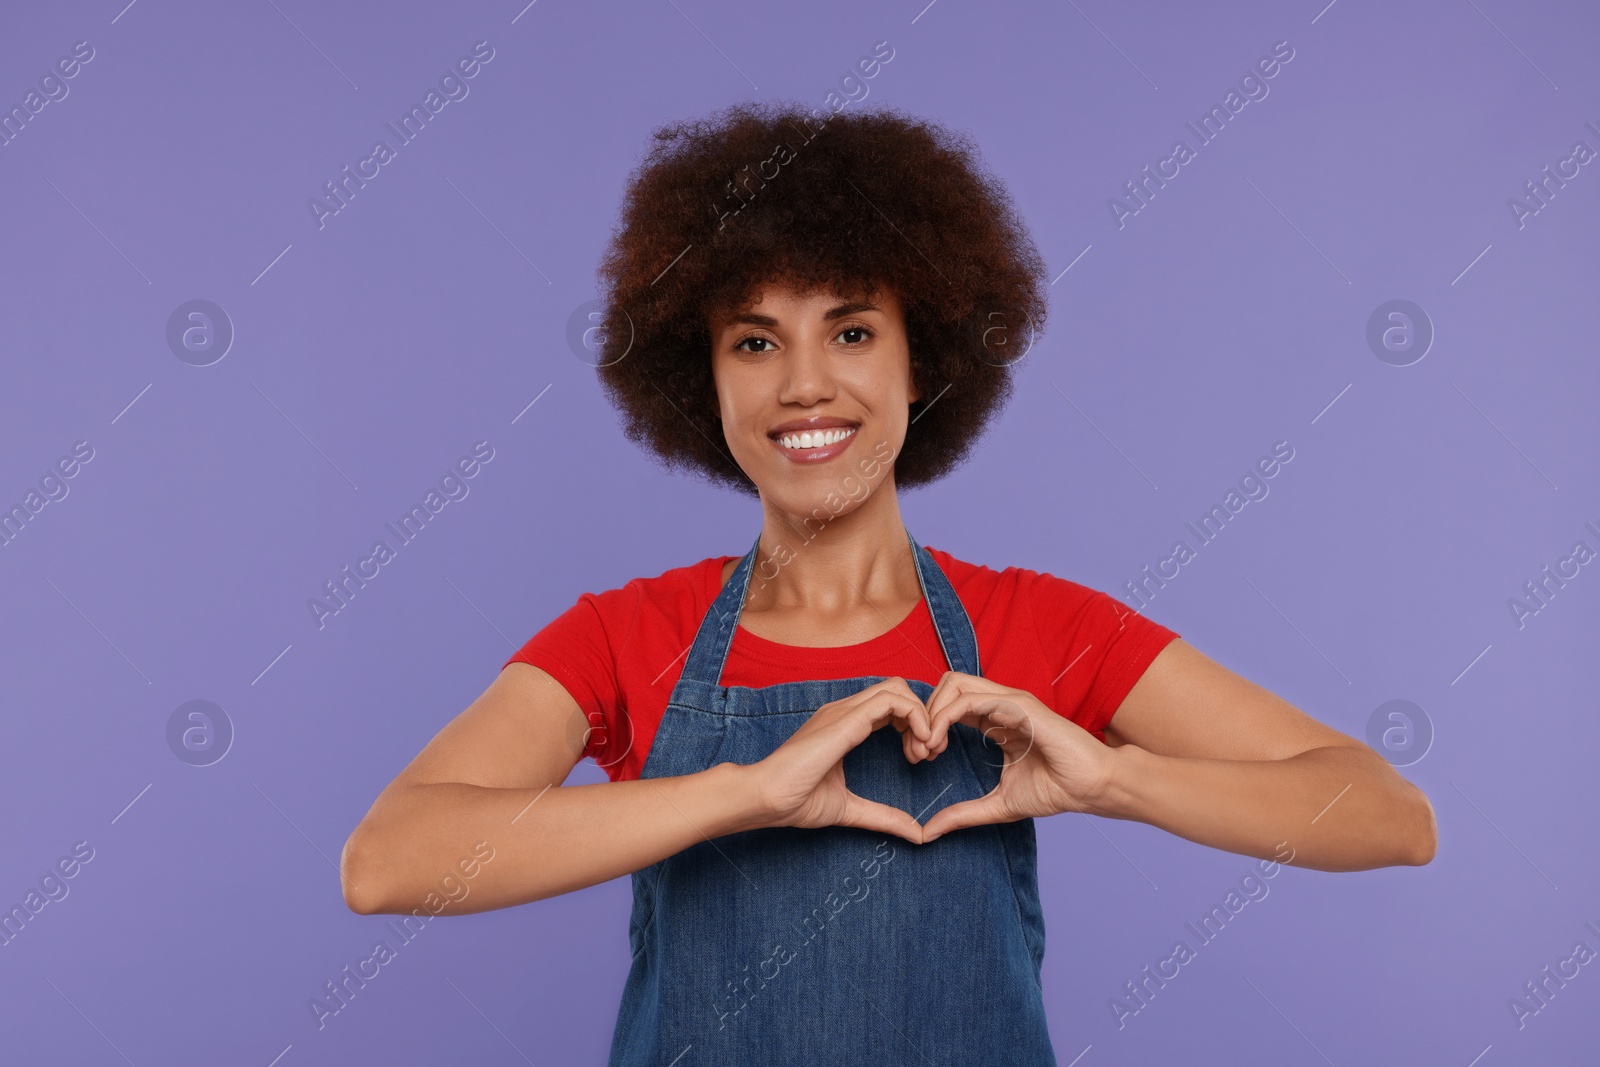 Photo of Happy young woman in apron showing heart gesture on purple background